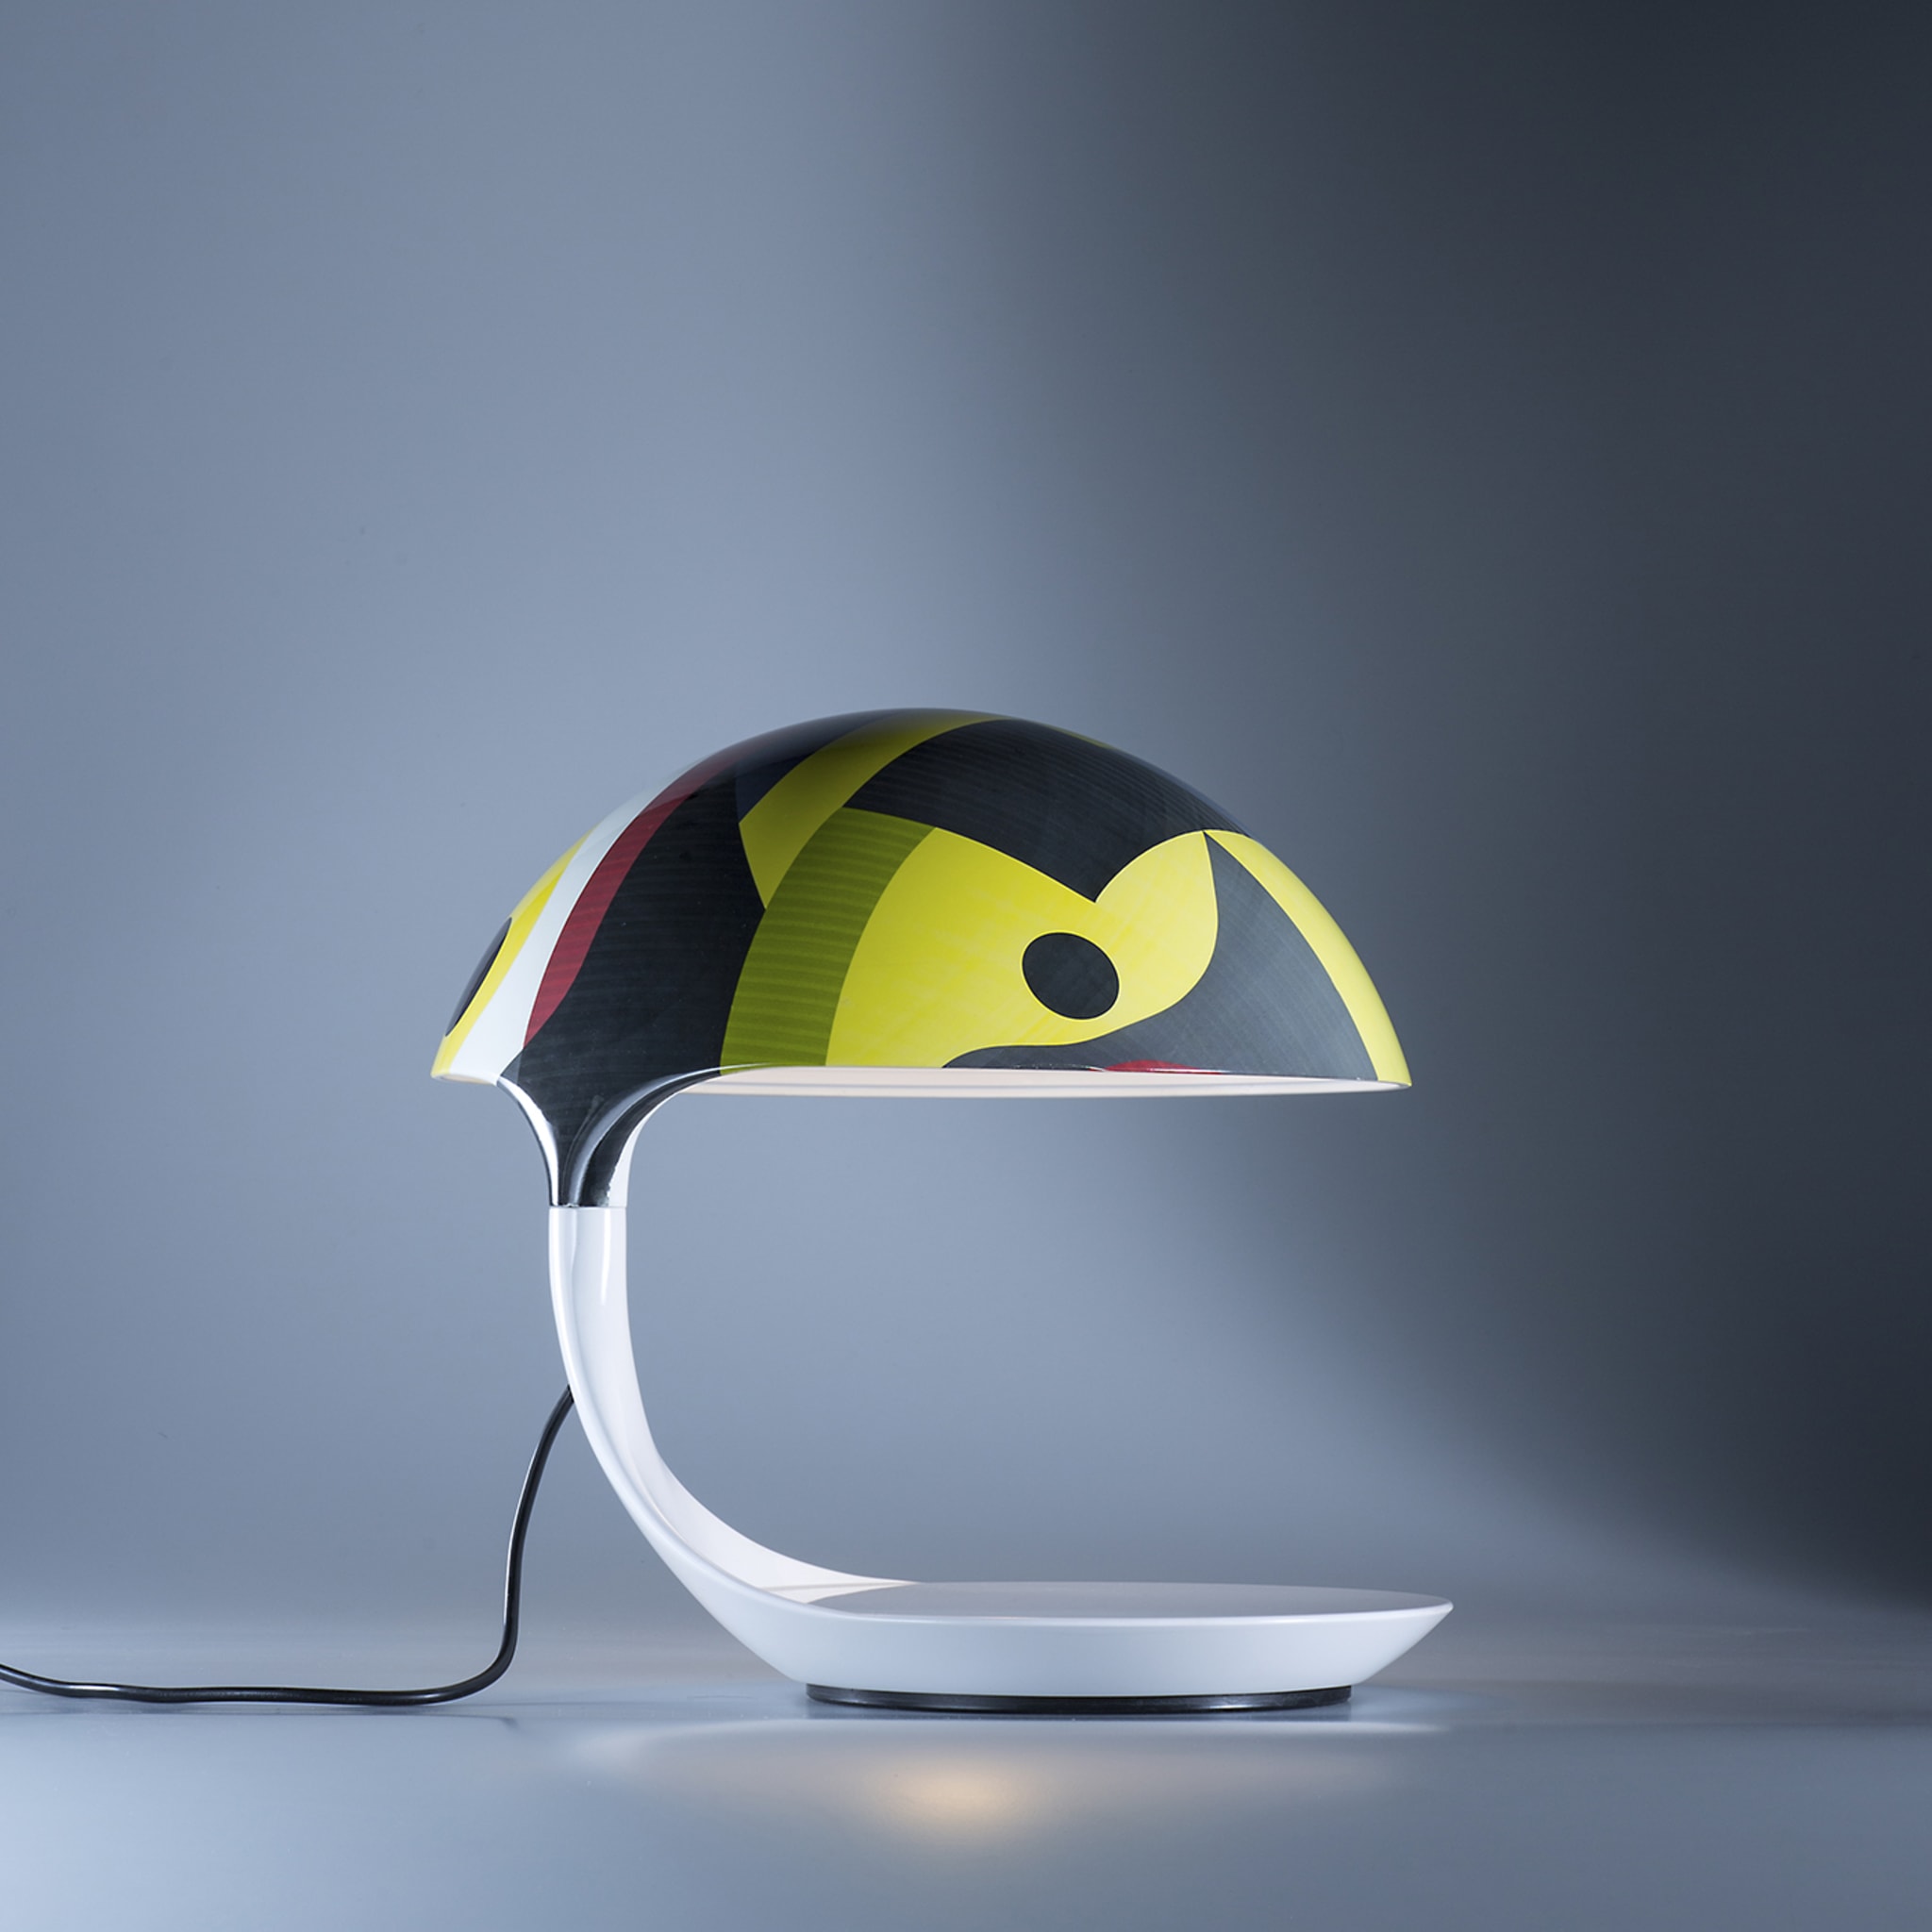 Cobra Texture Polychrome Table Lamp by Alessandro Guerriero - Alternative view 3